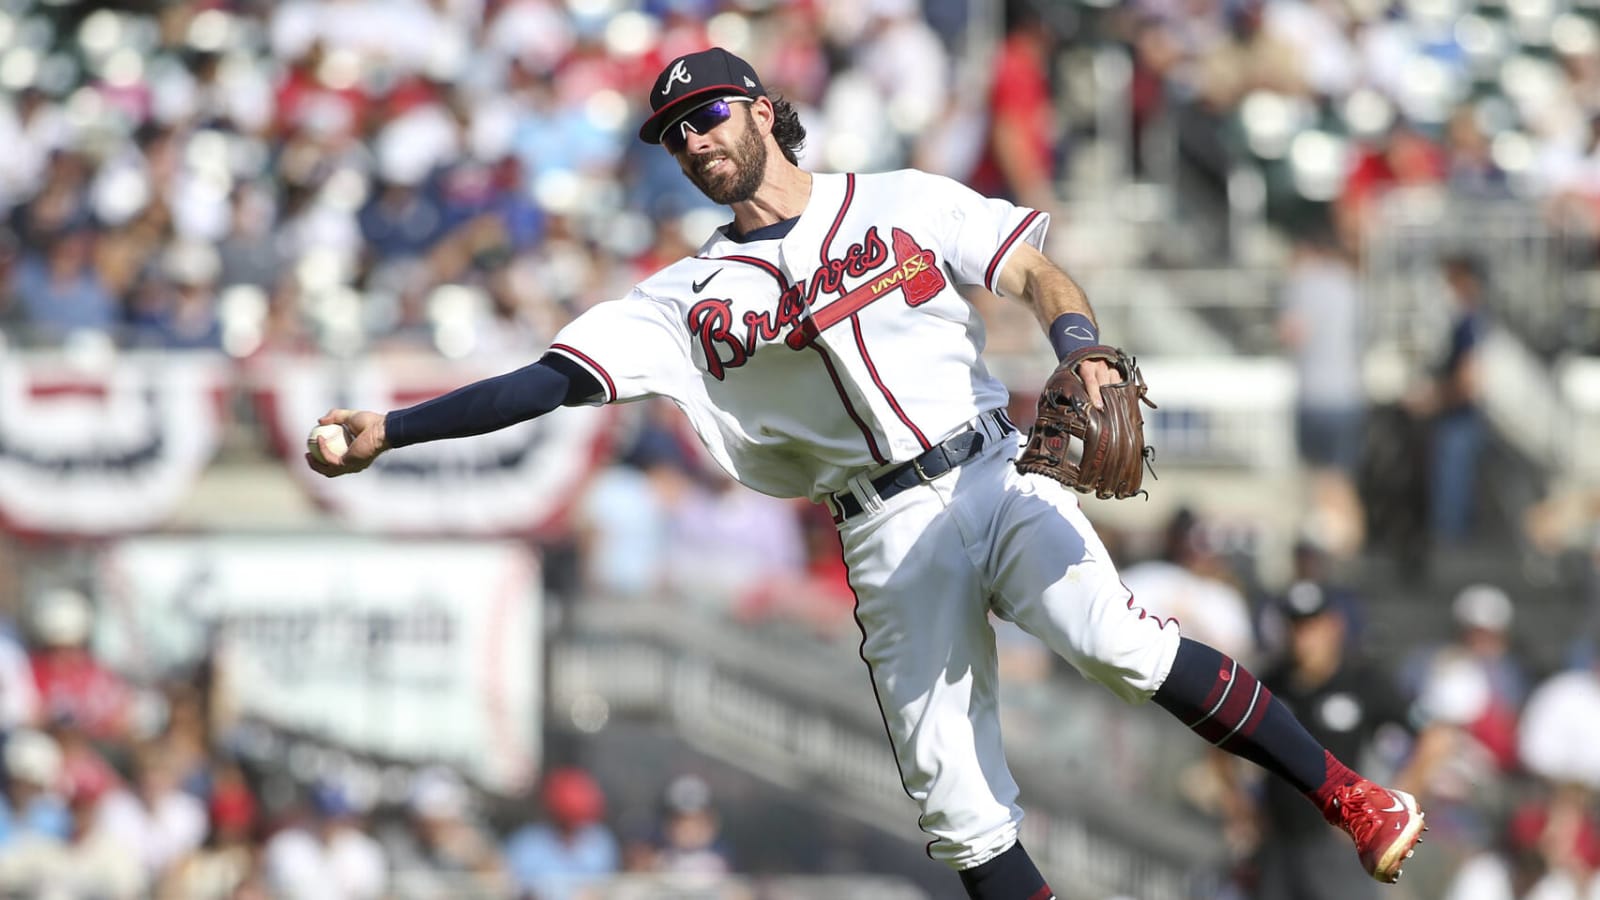 It appears to be a two-team race for free-agent SS Dansby Swanson